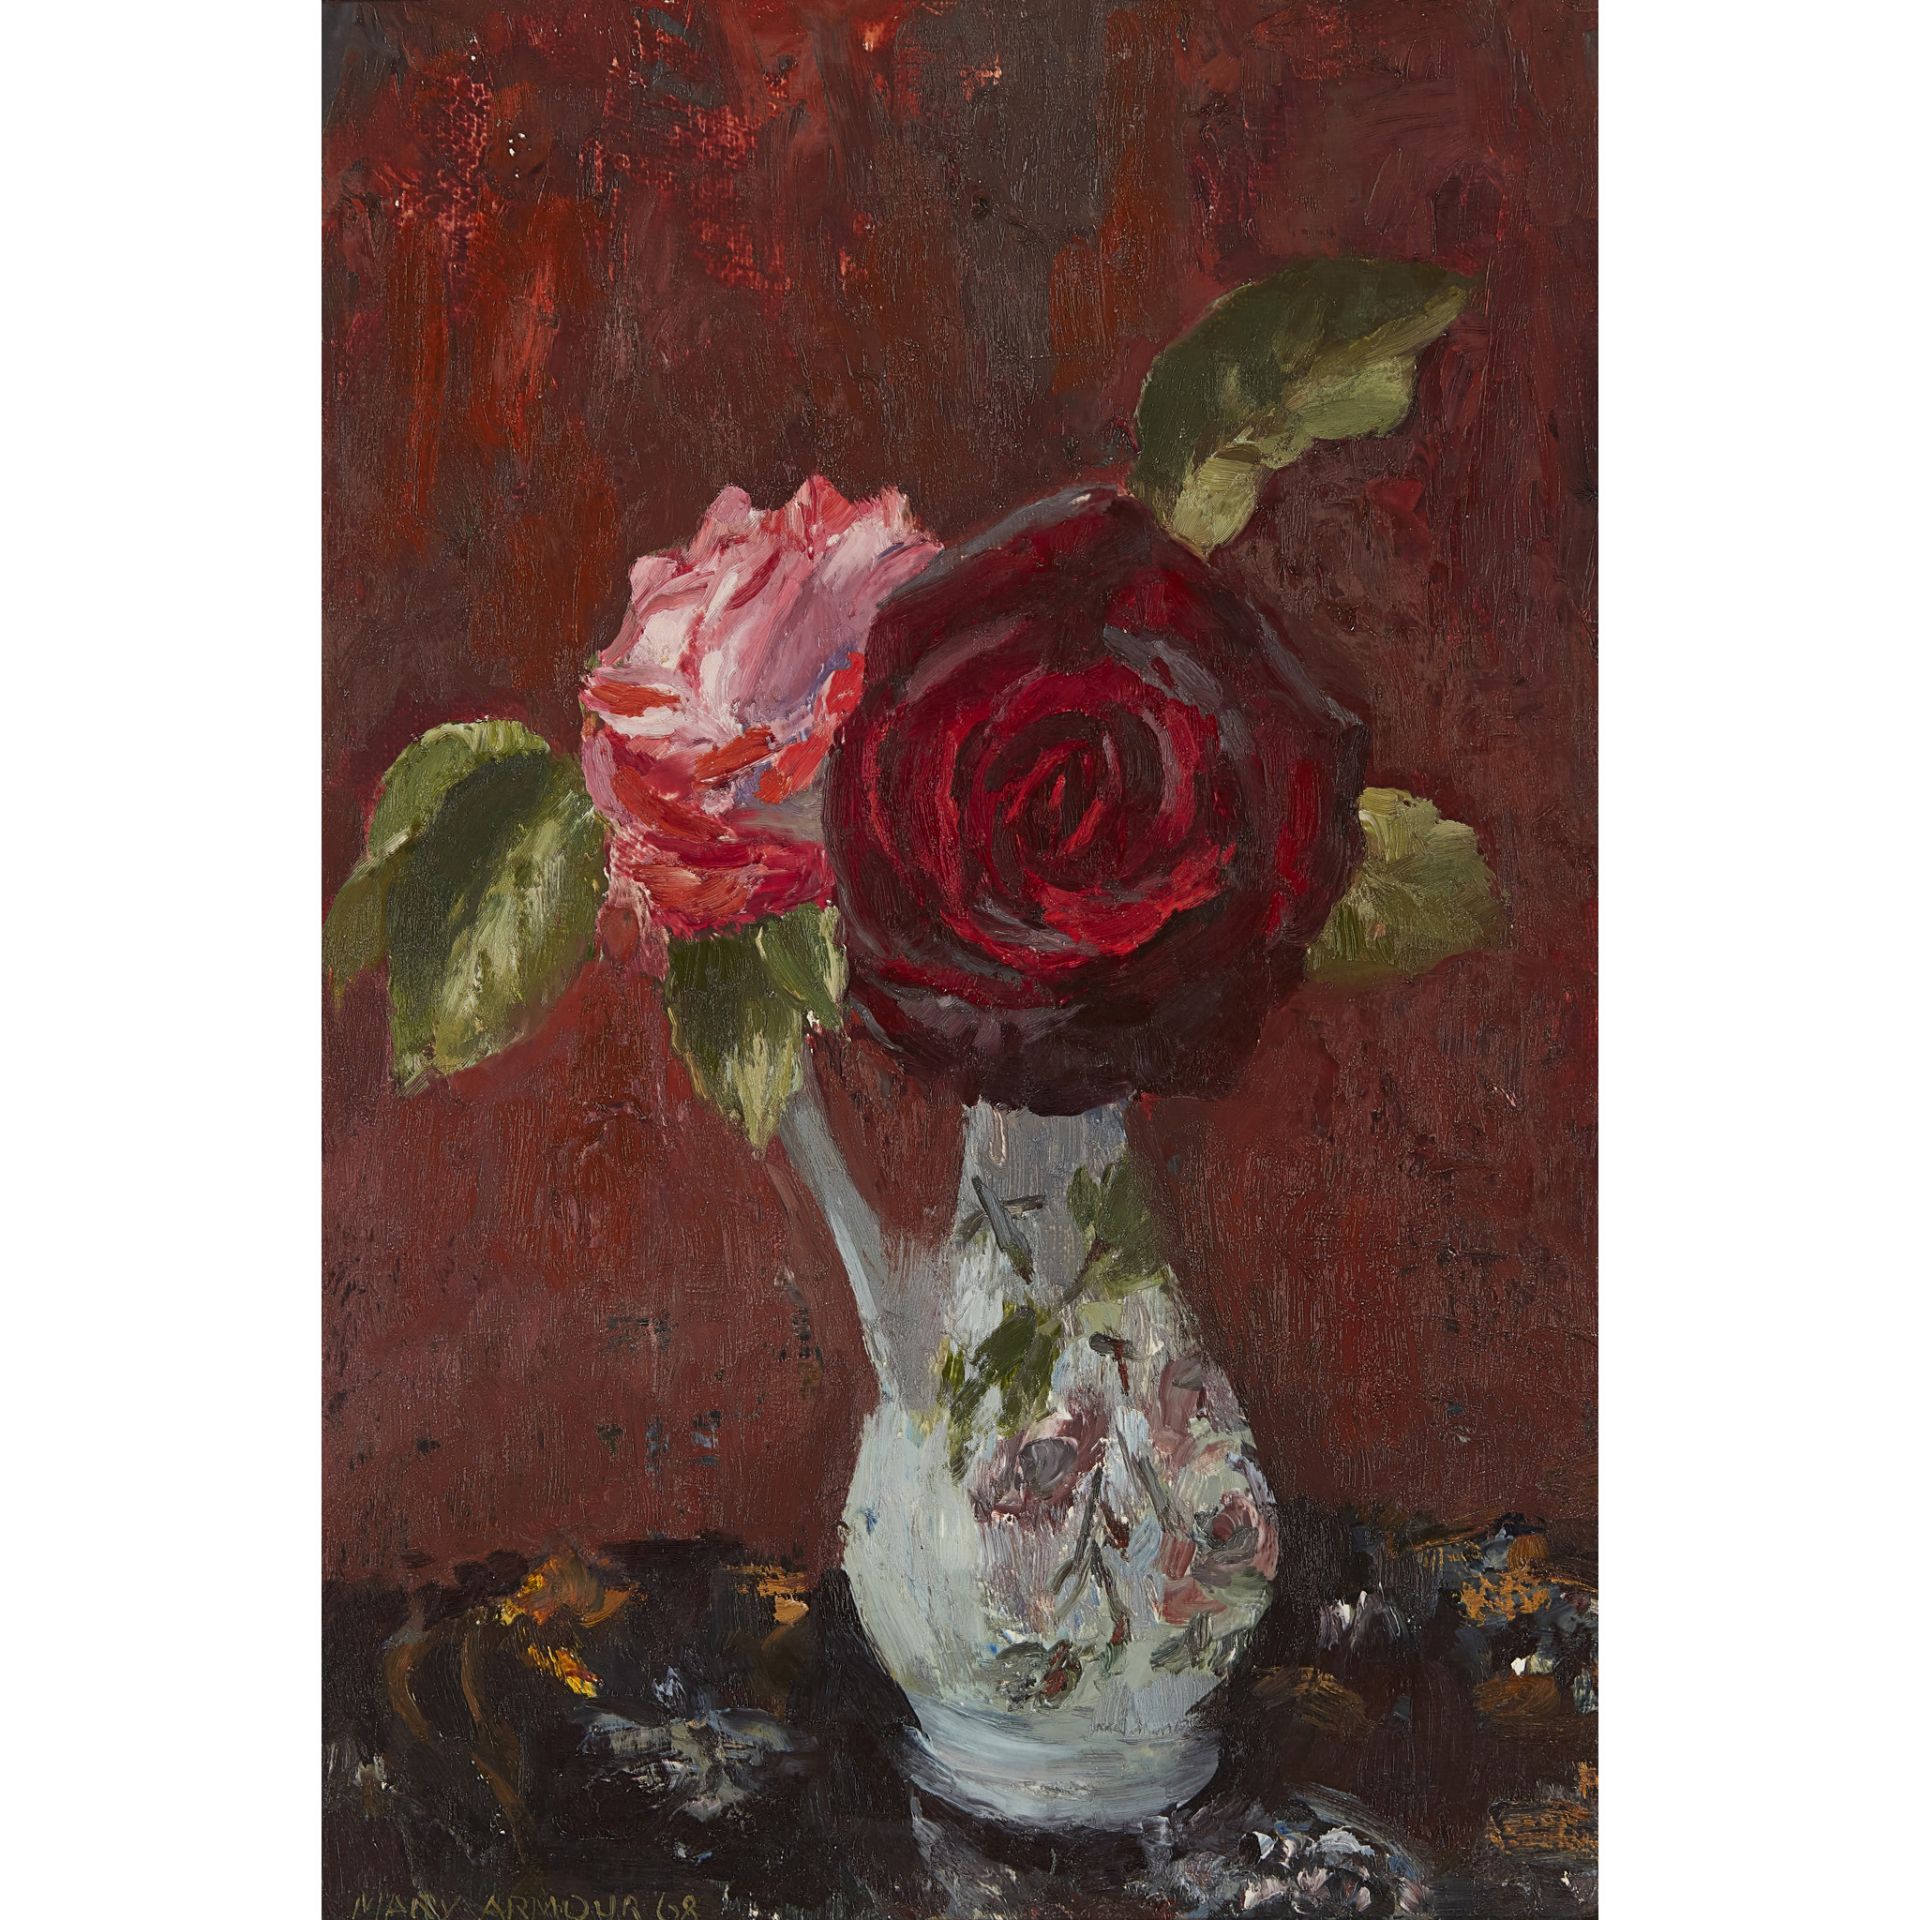 § MARY NICOL NEILL ARMOUR R.S.A., R.S.W (SCOTTISH 1902-2000) STILL LIFE WITH RED AND PINK ROSES -